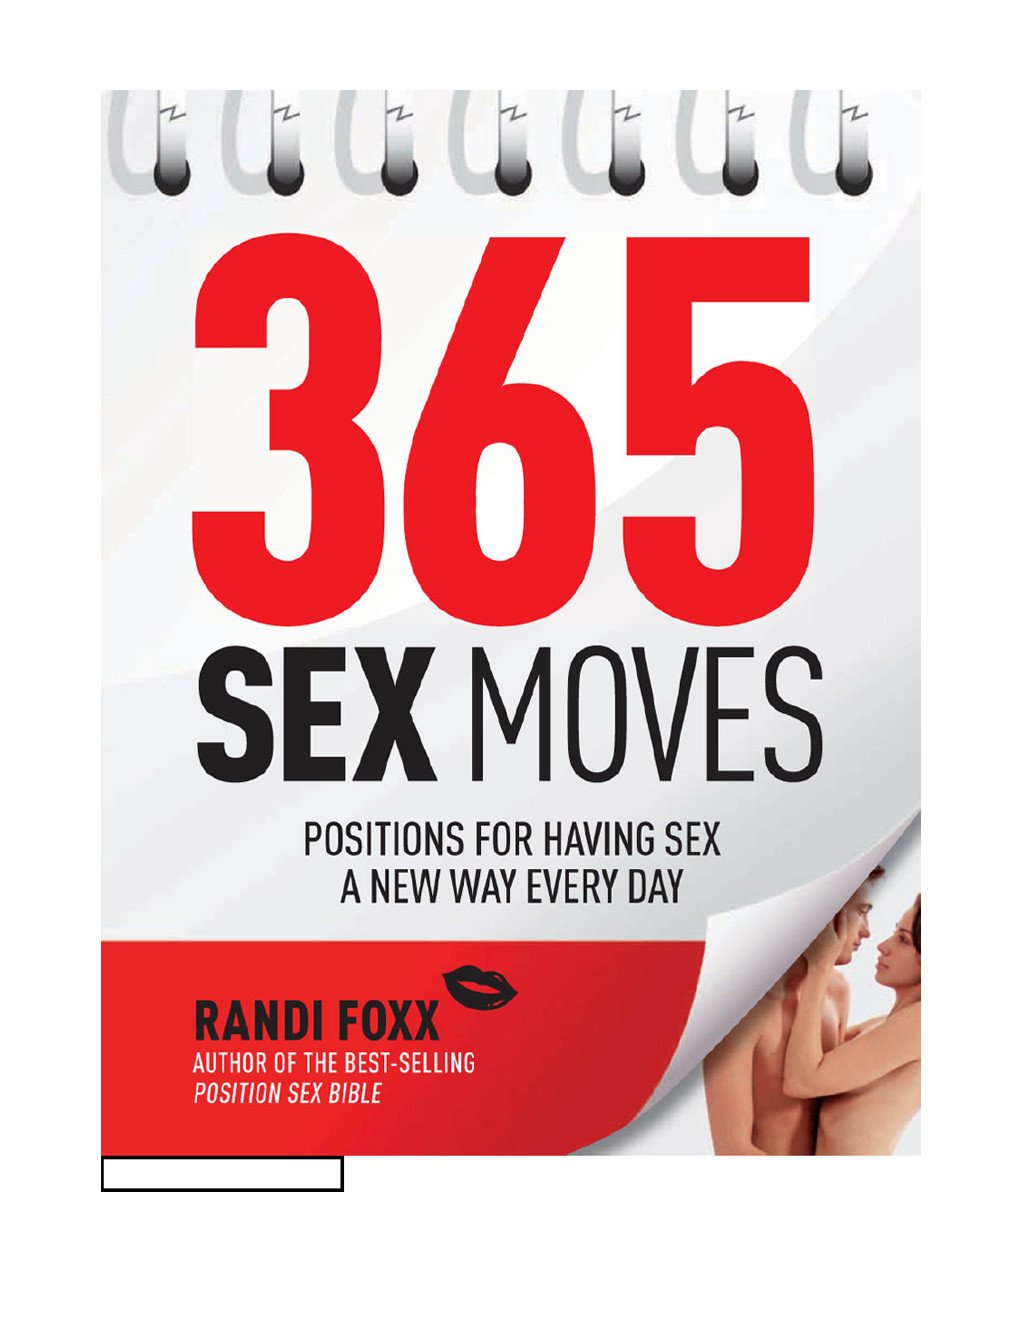 Adult Books - How To and Sex Guides